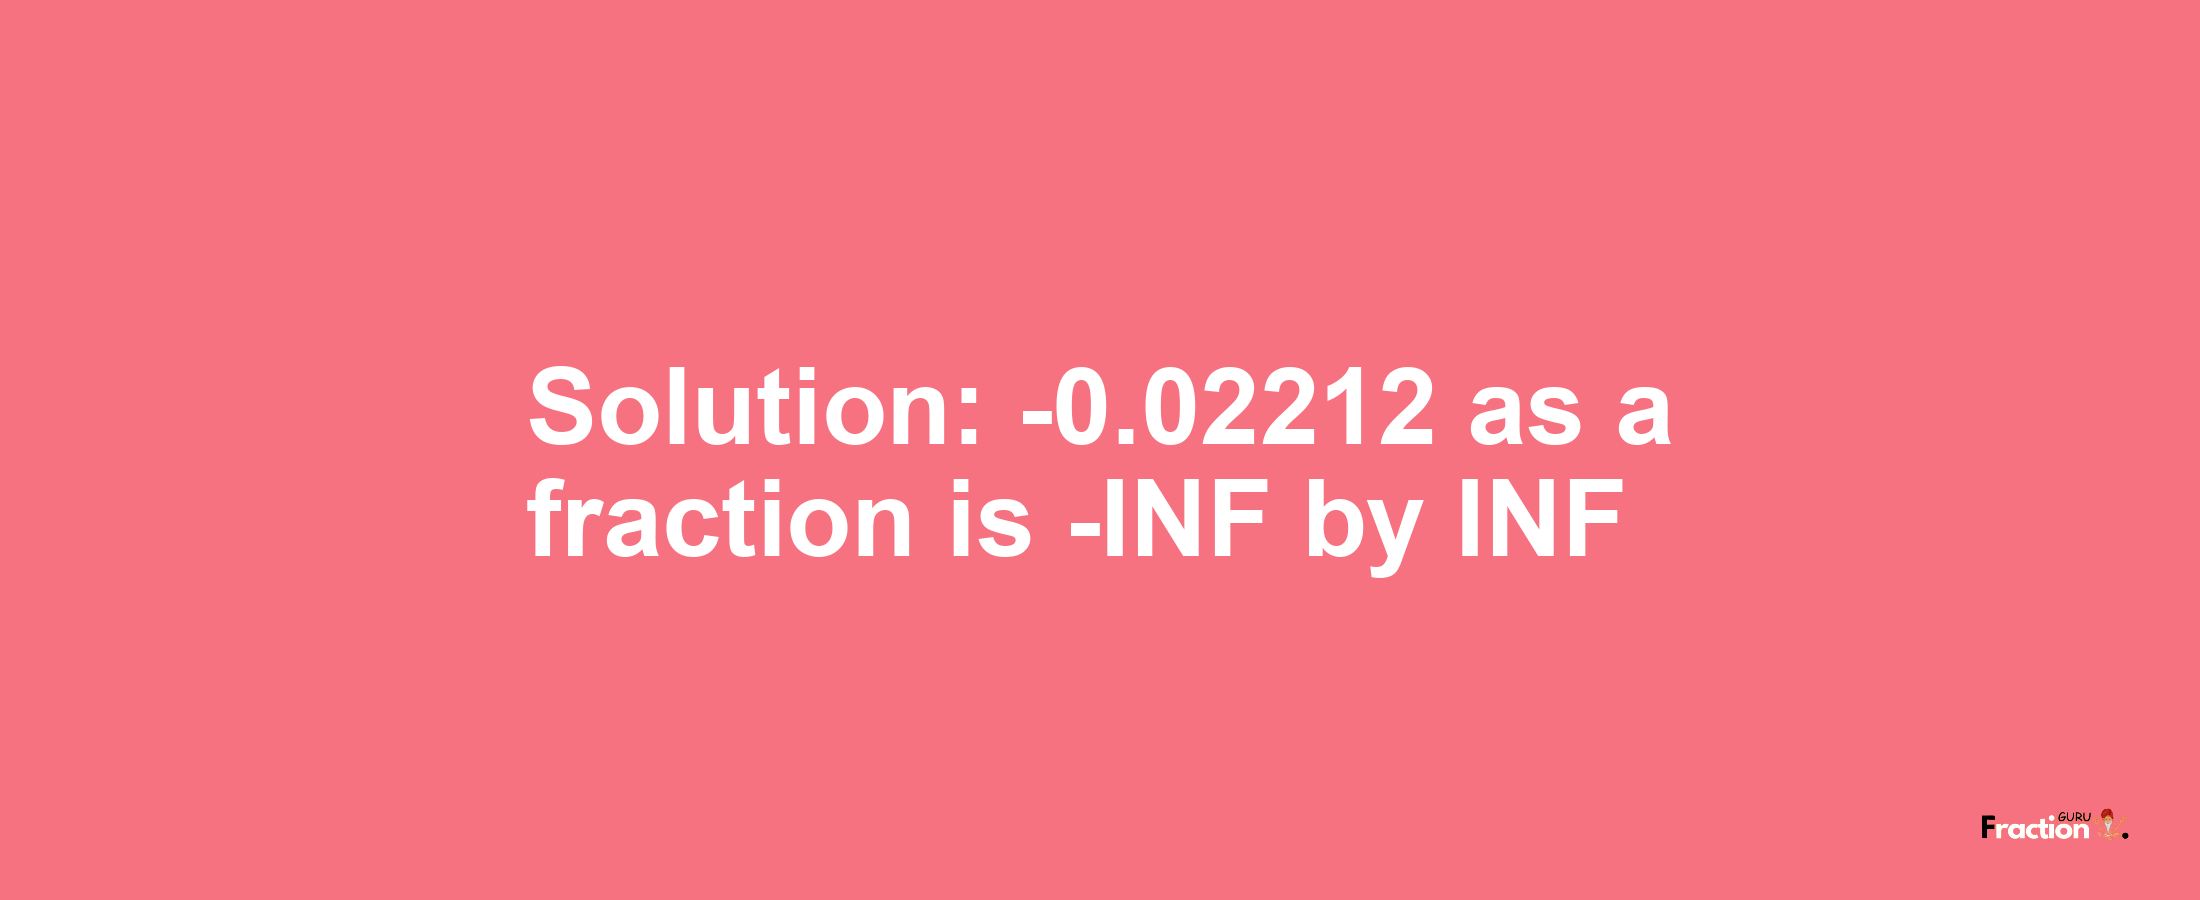 Solution:-0.02212 as a fraction is -INF/INF